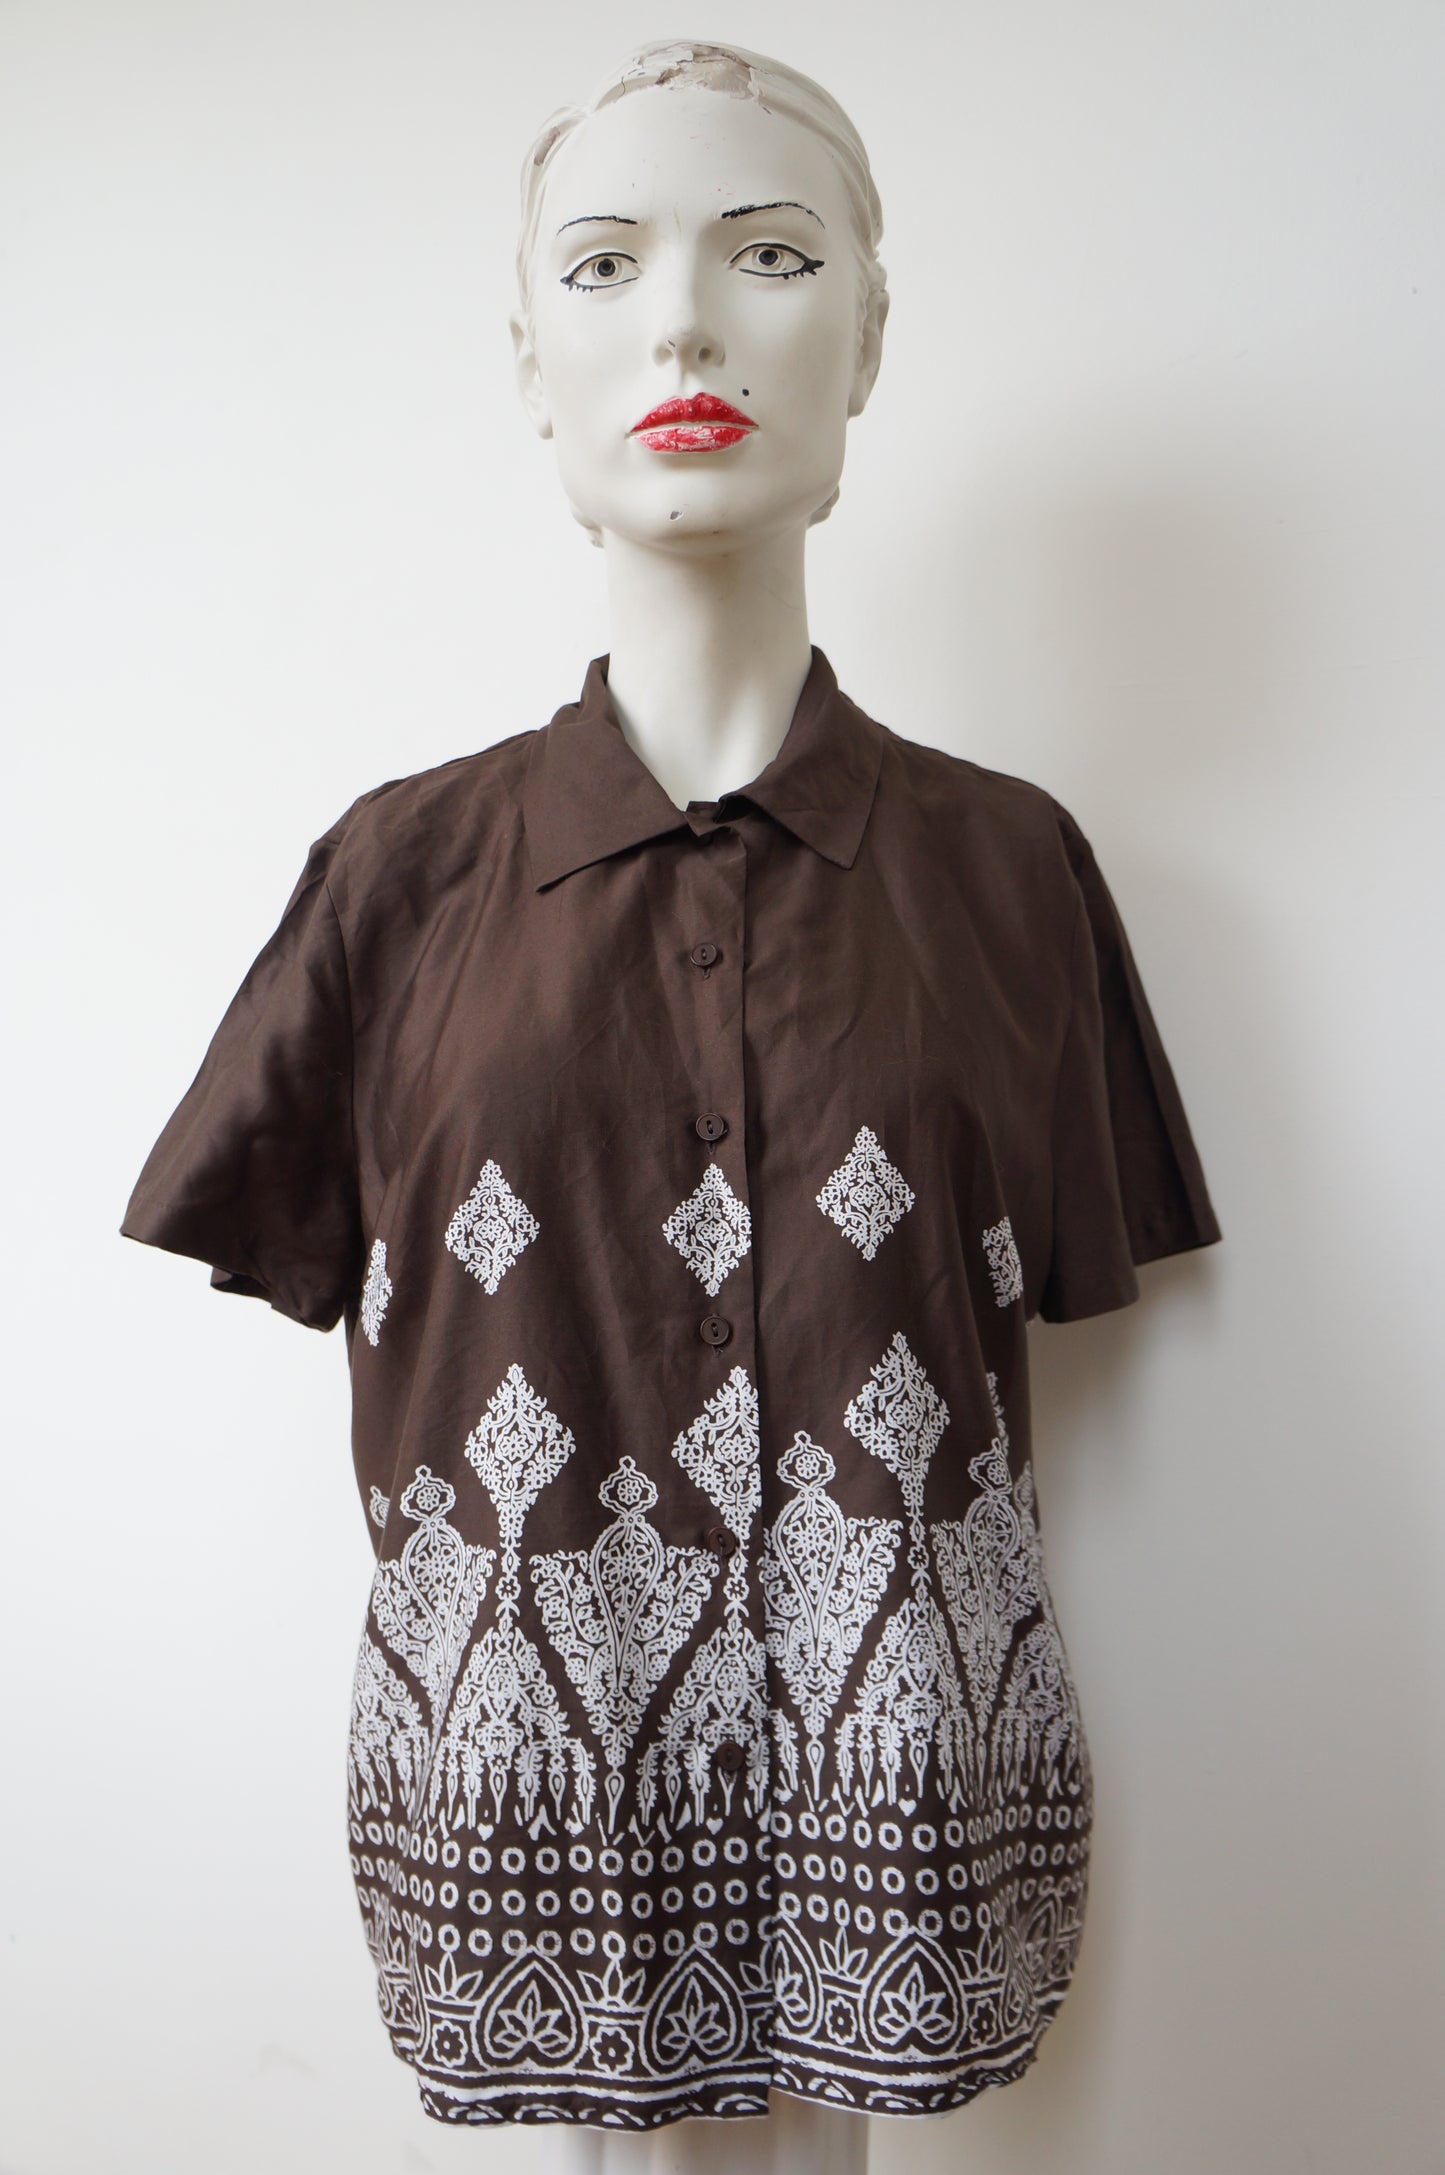 Chemise brown chic